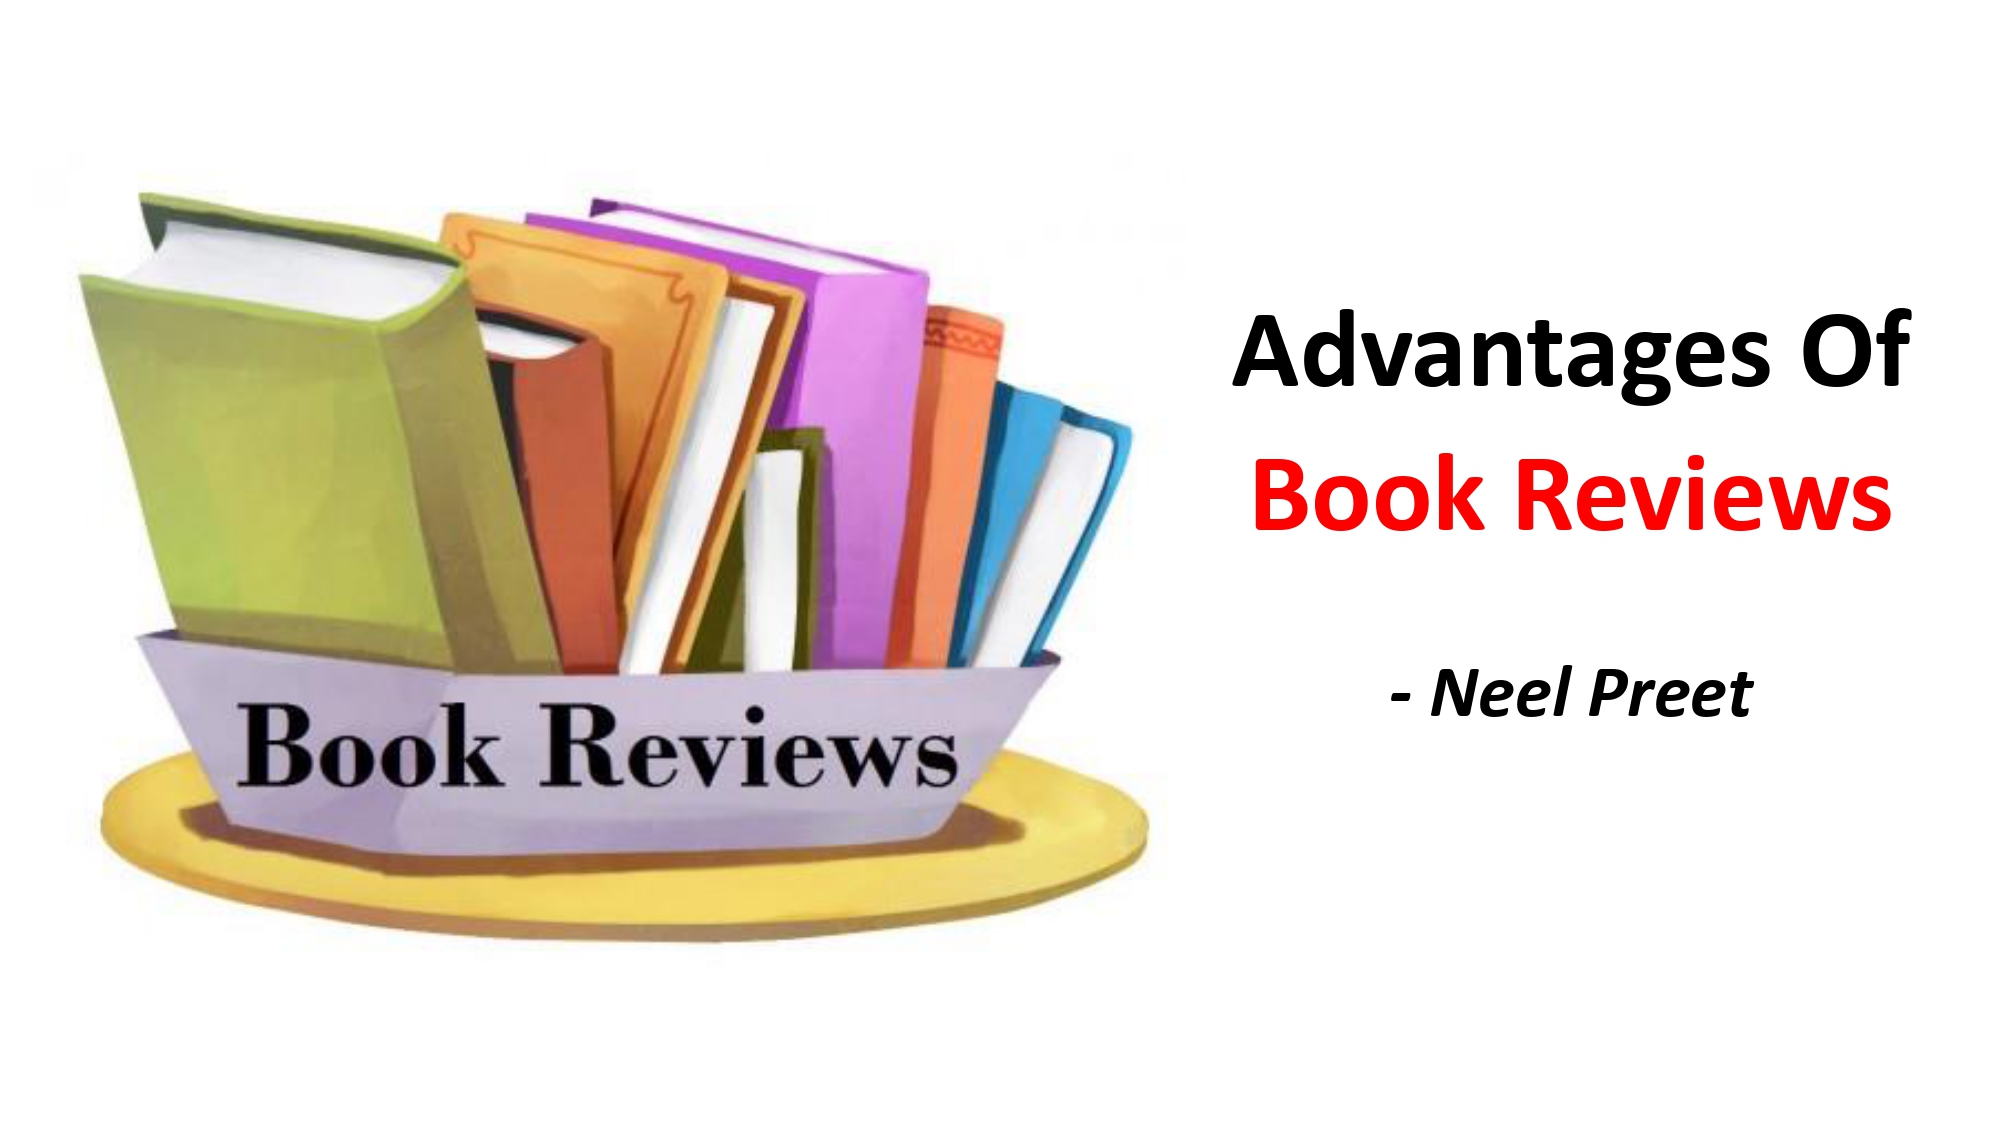 advantages of using literature review